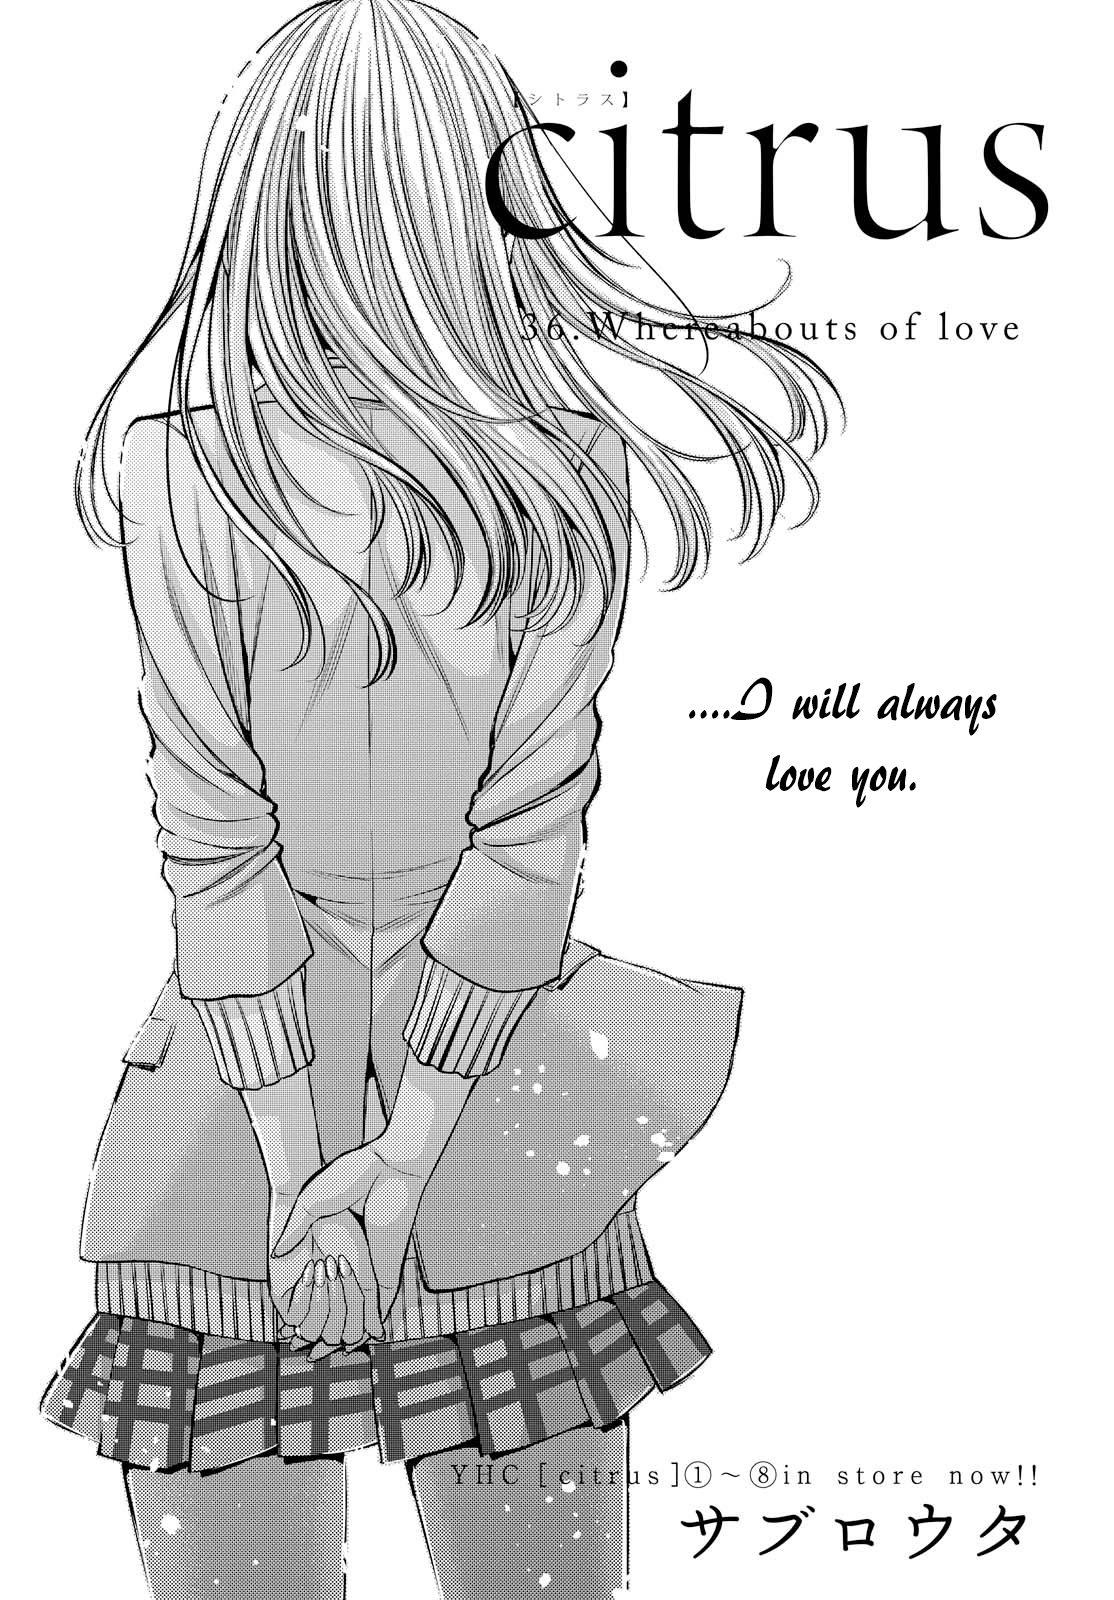 Citrus Vol. 9 Ch. 36 Whereabouts of love